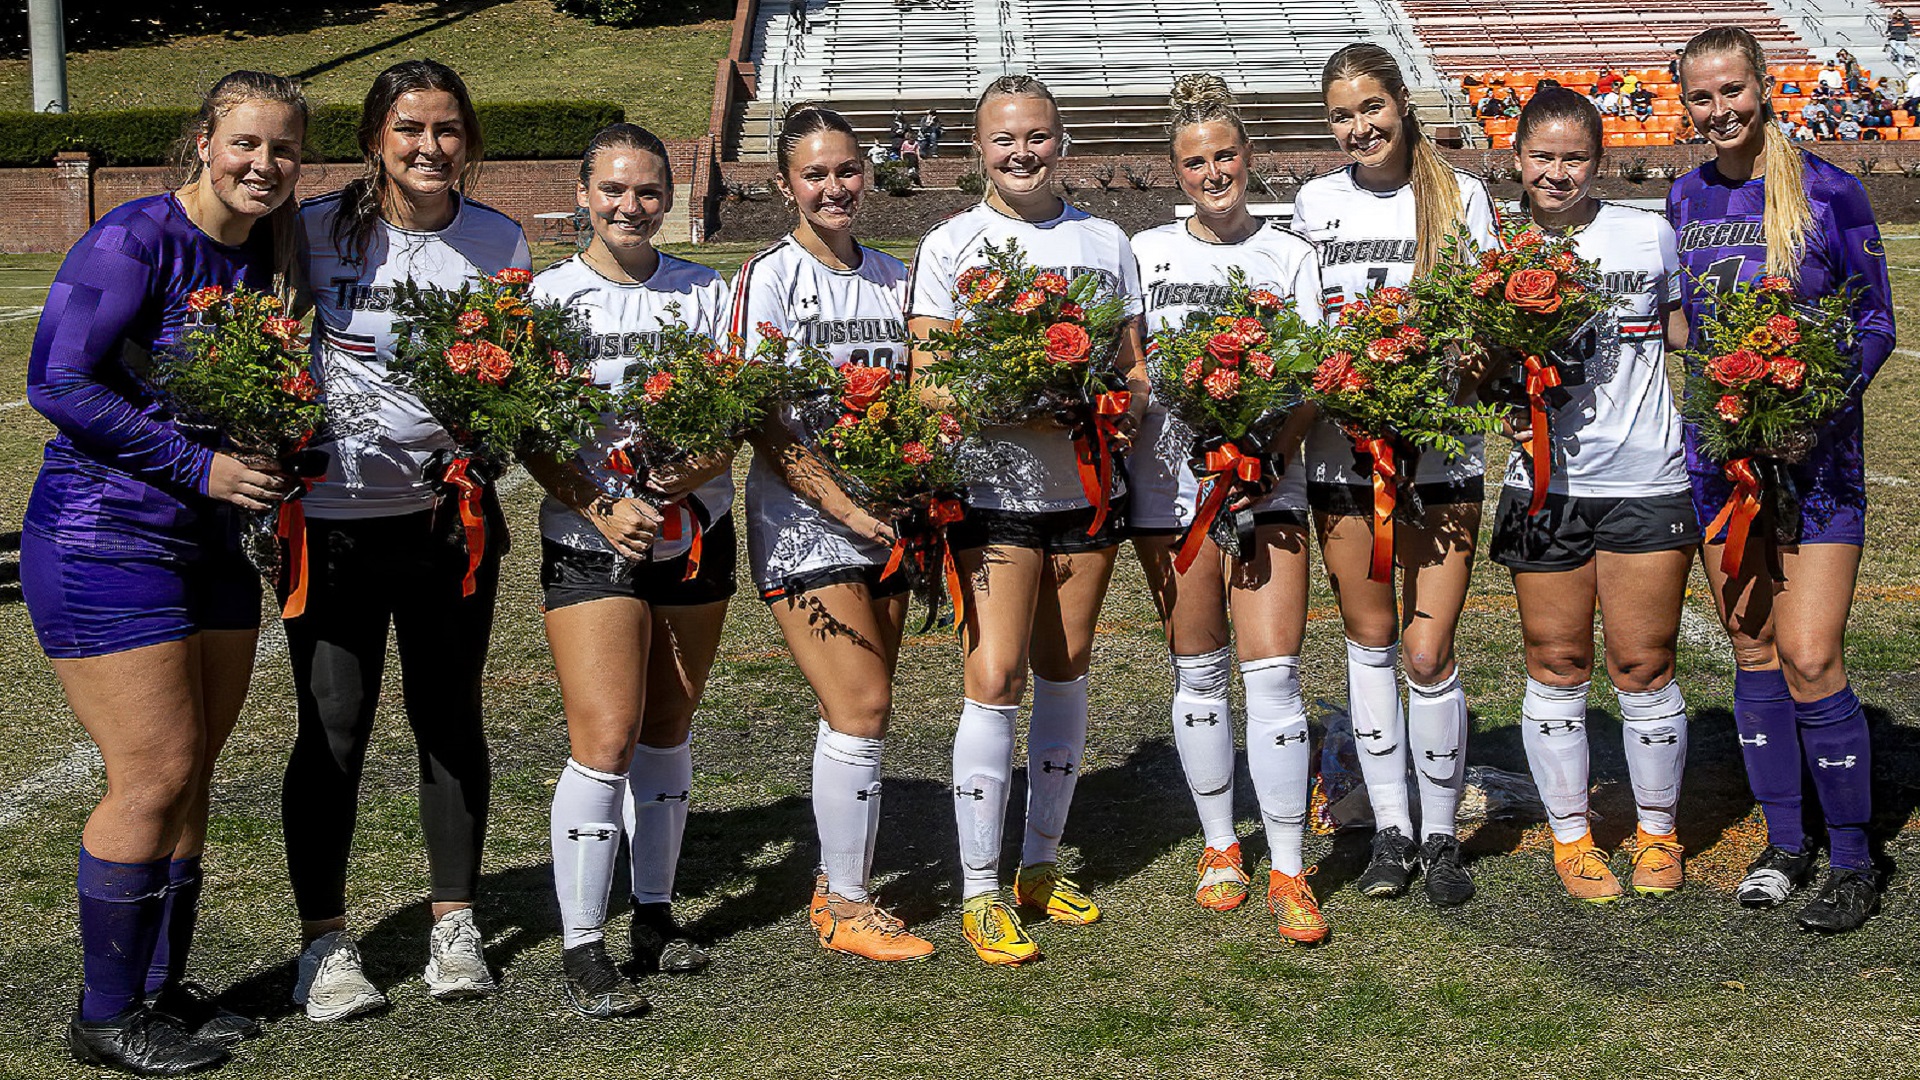 Tusculum's nine senior women's soccer players are recognized before the game (photo by Chuck Williams)